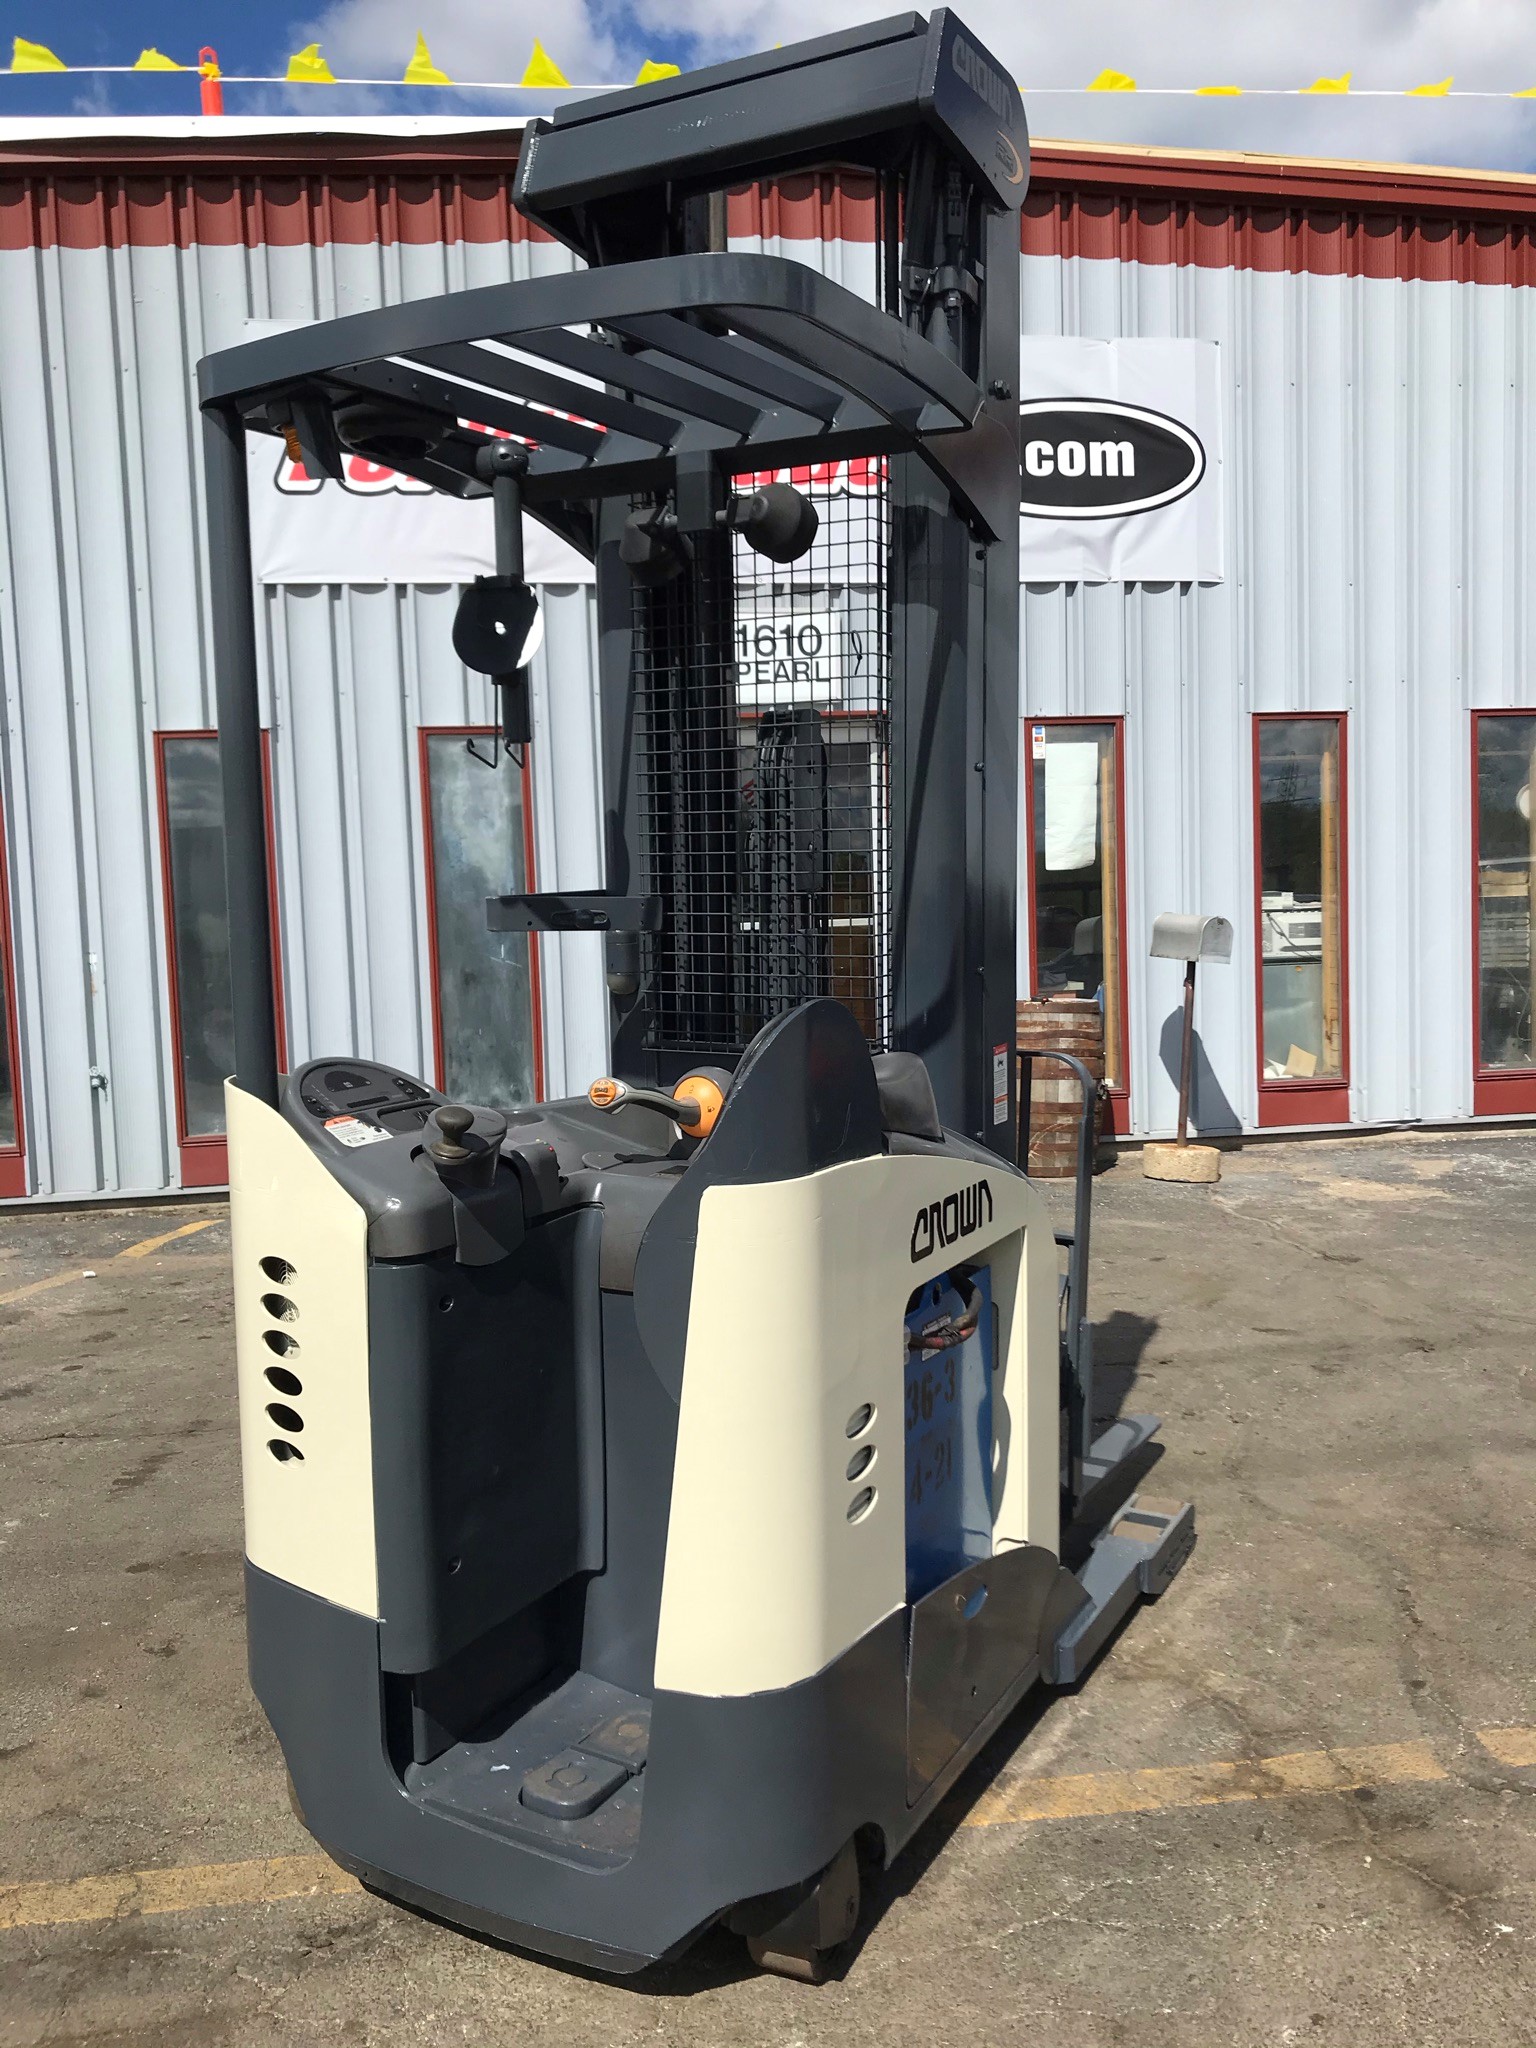 4,500lb capacity 2007 crown reach truck for sale